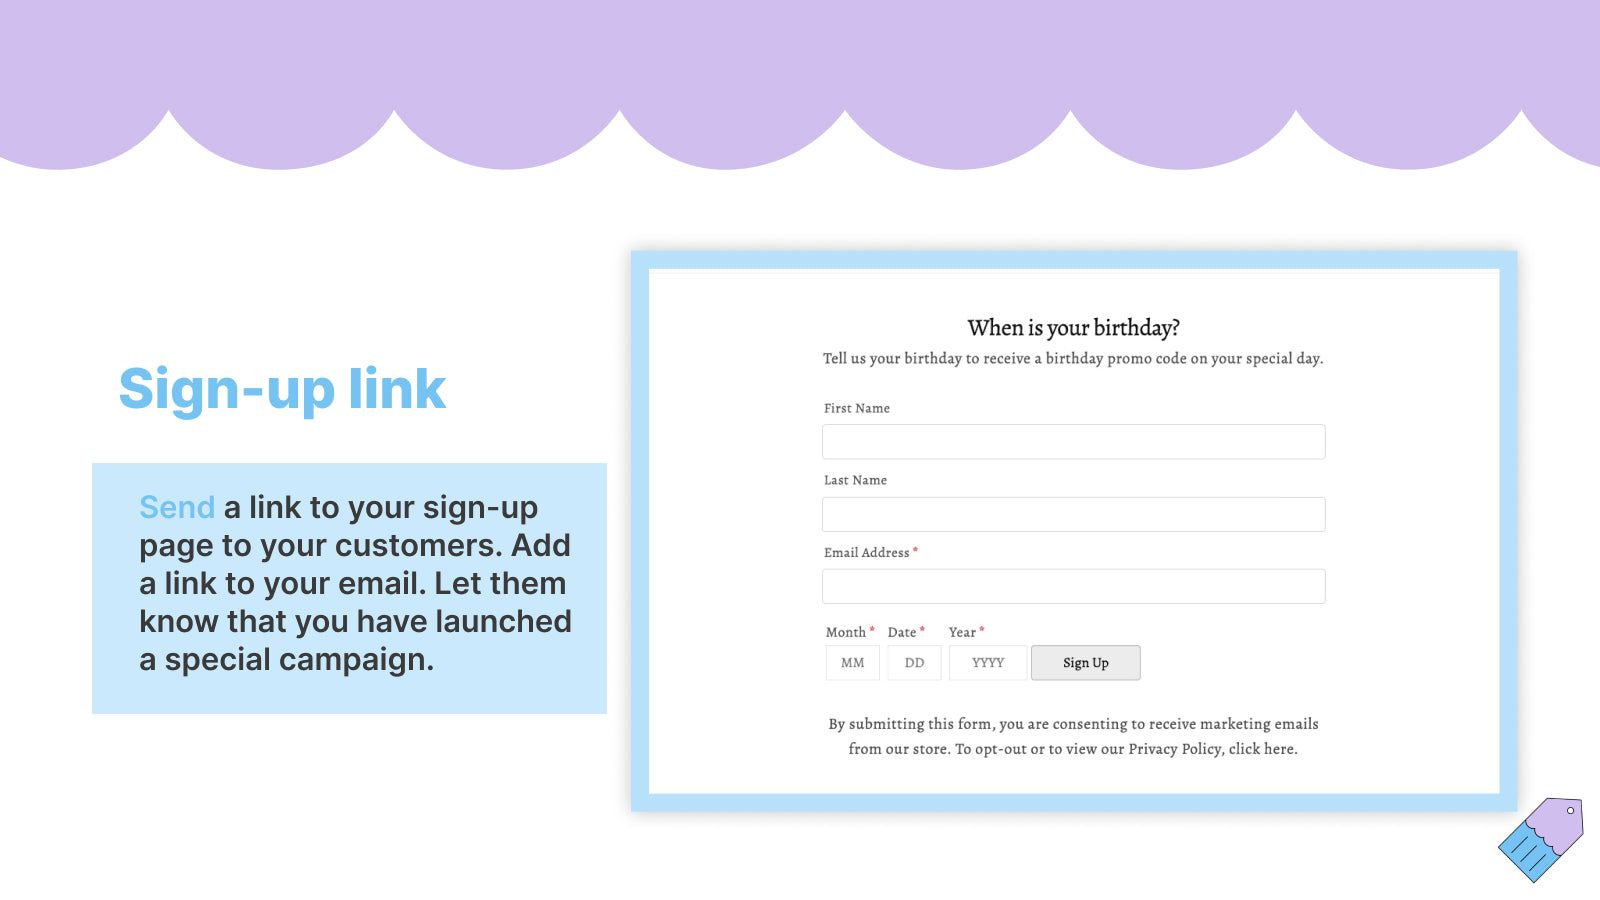 Send a link to a separate landing page where they can sign-up.